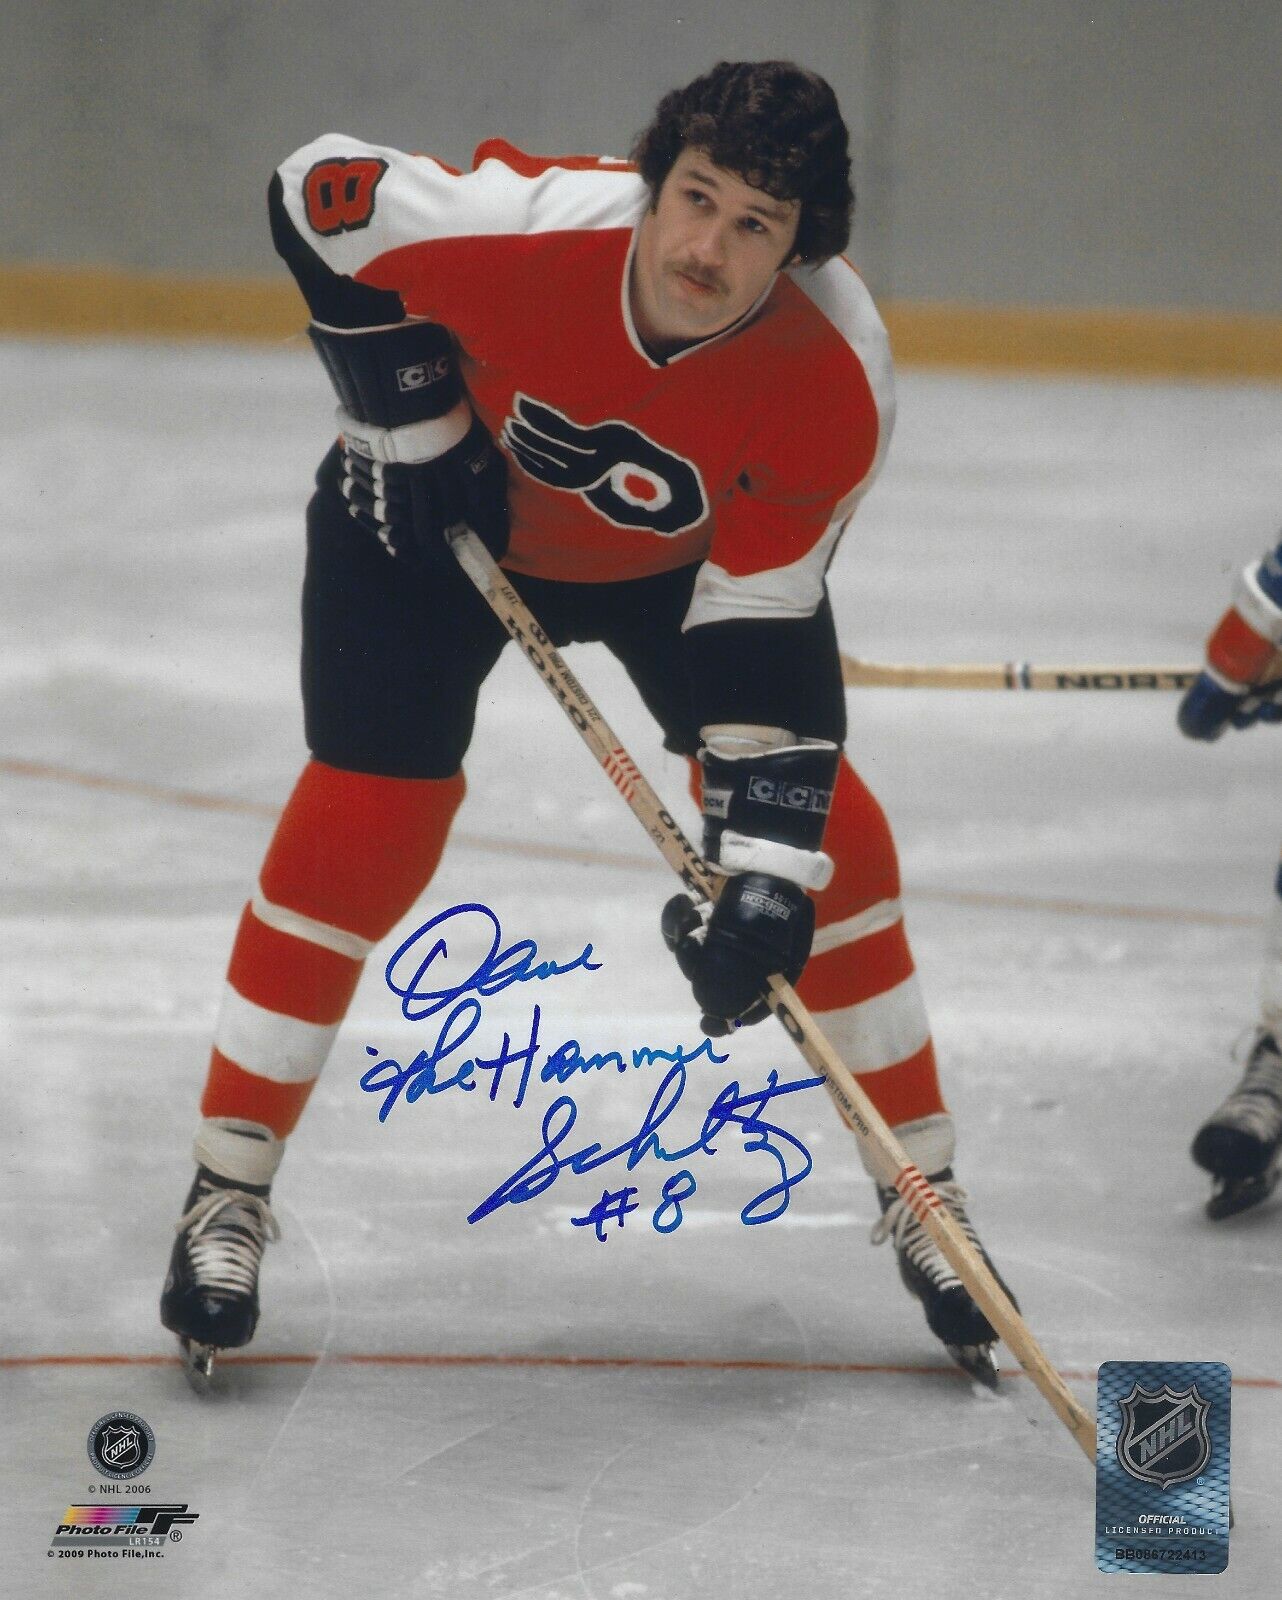 Autographed 8x10 Dave the Hammer Schultz Philadelphia Flyers Photo Poster painting w/Show ticket